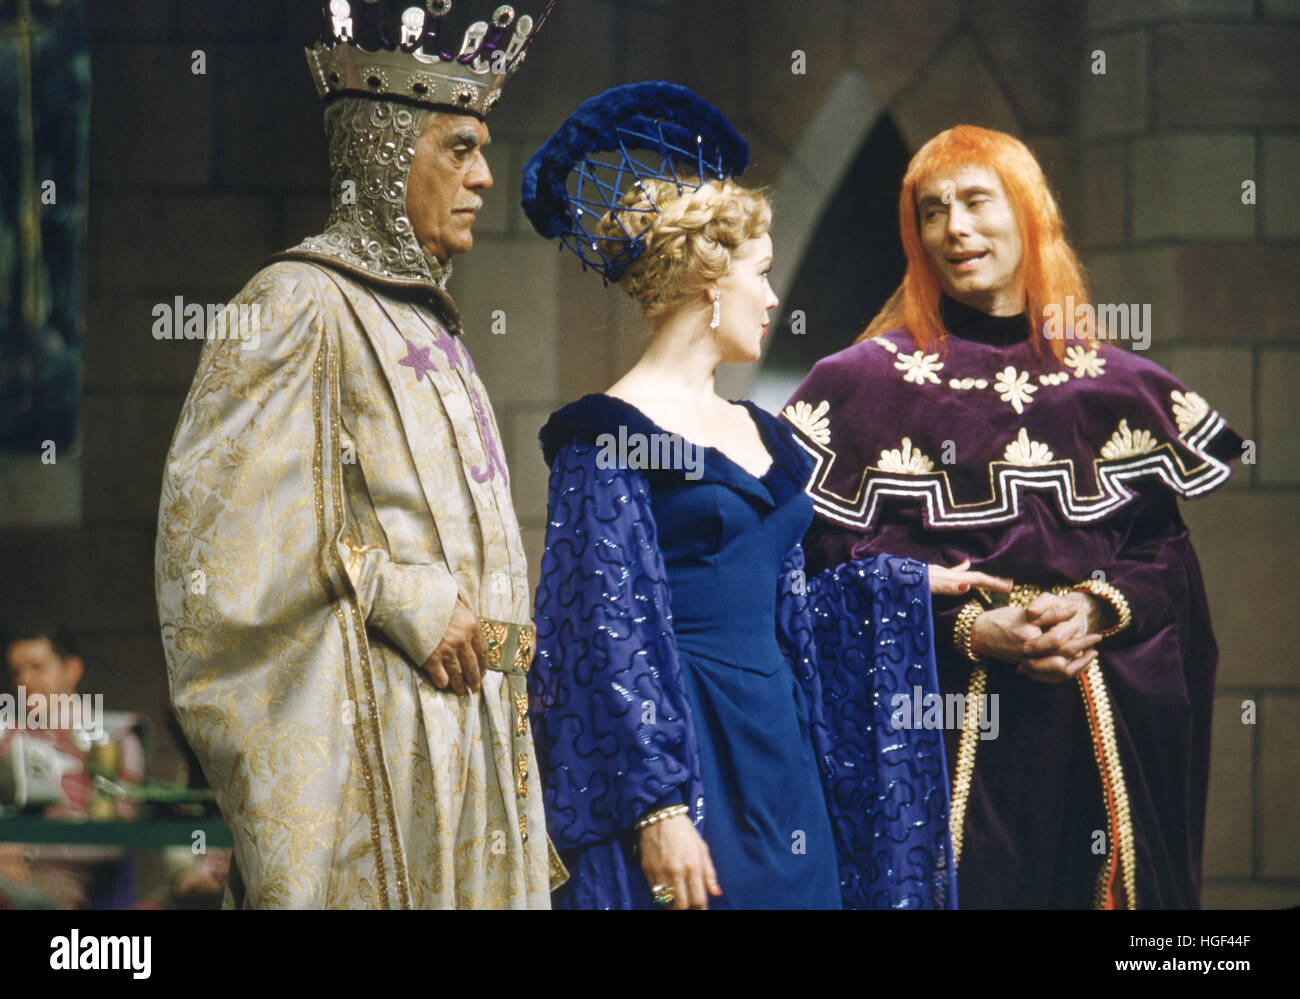 Boris Karloff, Gale Sherwood, and Leonard Elliott, in the 1955 production of A Connecticut Yankee in King Arthur’s Court by Max Liebman. Stock Photo